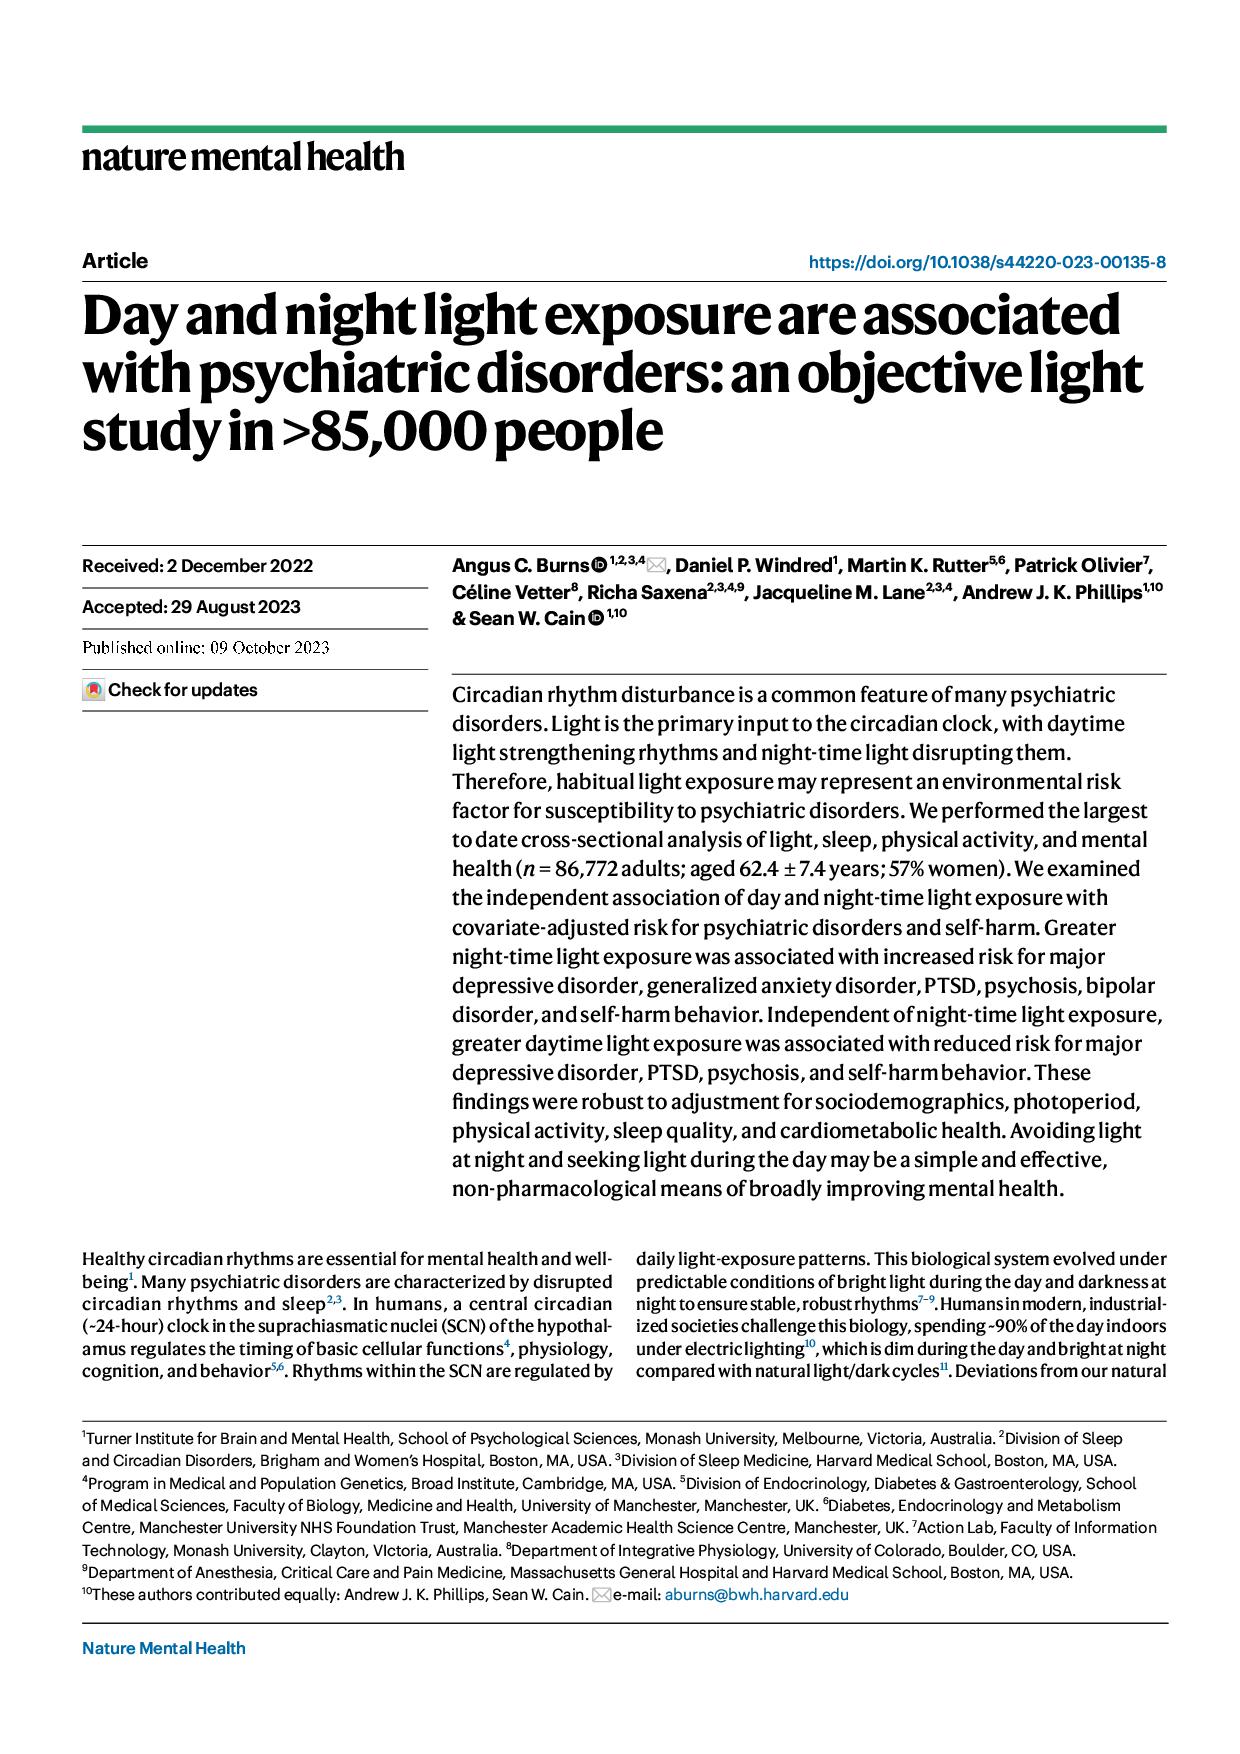 Day and night light exposure are associated with psychiatric disorders: an objective light study in >85,000 people